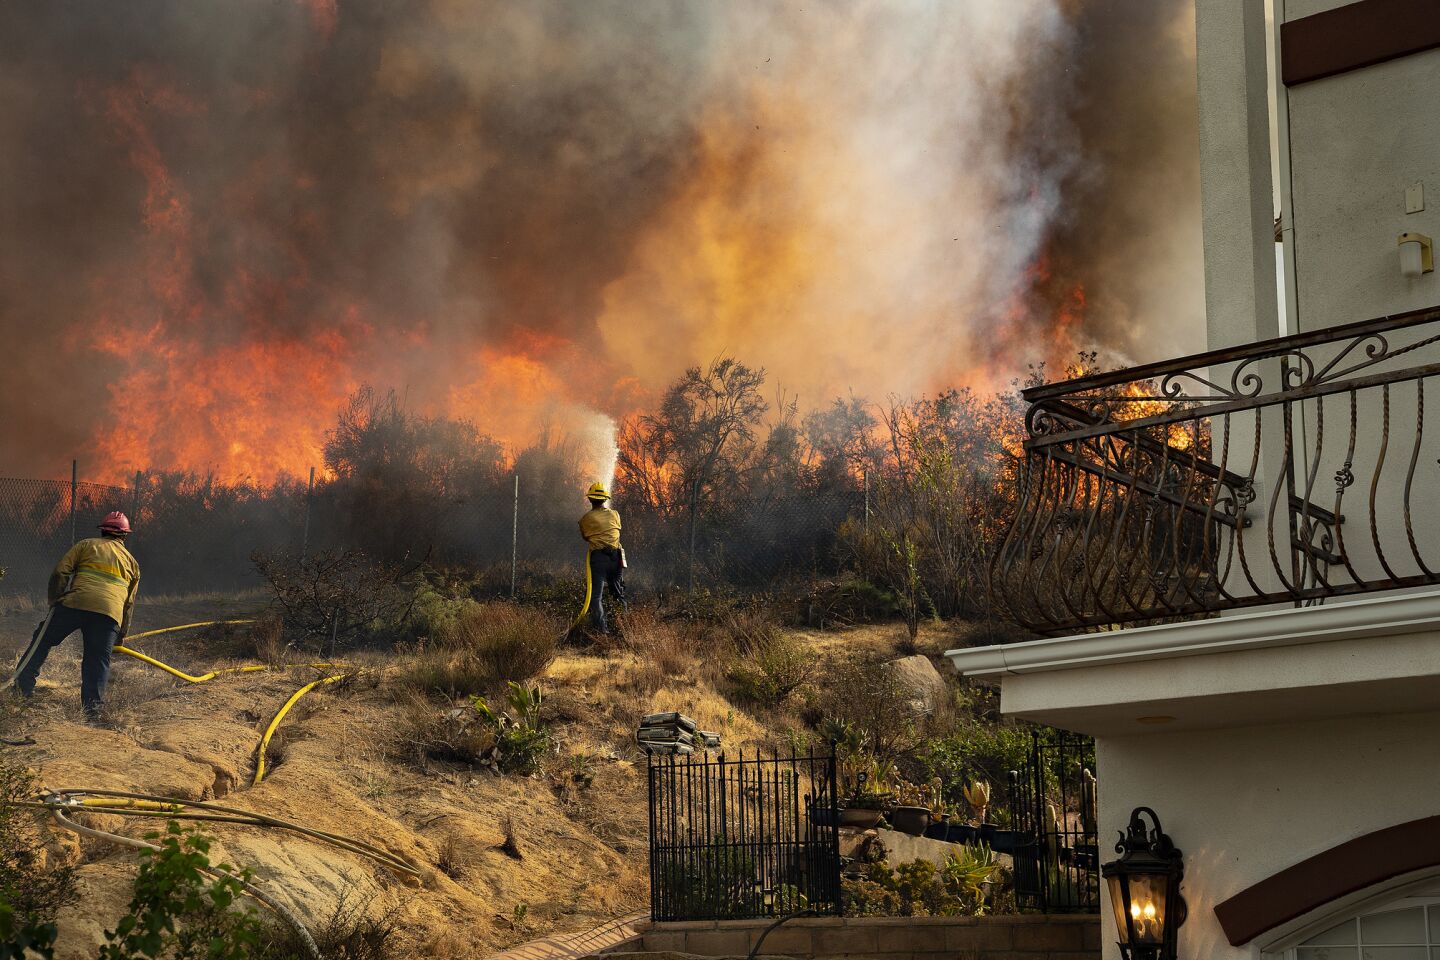 Firefighters battle to save a home from a wall off flames as the Holy fire continues to burn out of control in Lake Elsinore, Calif.